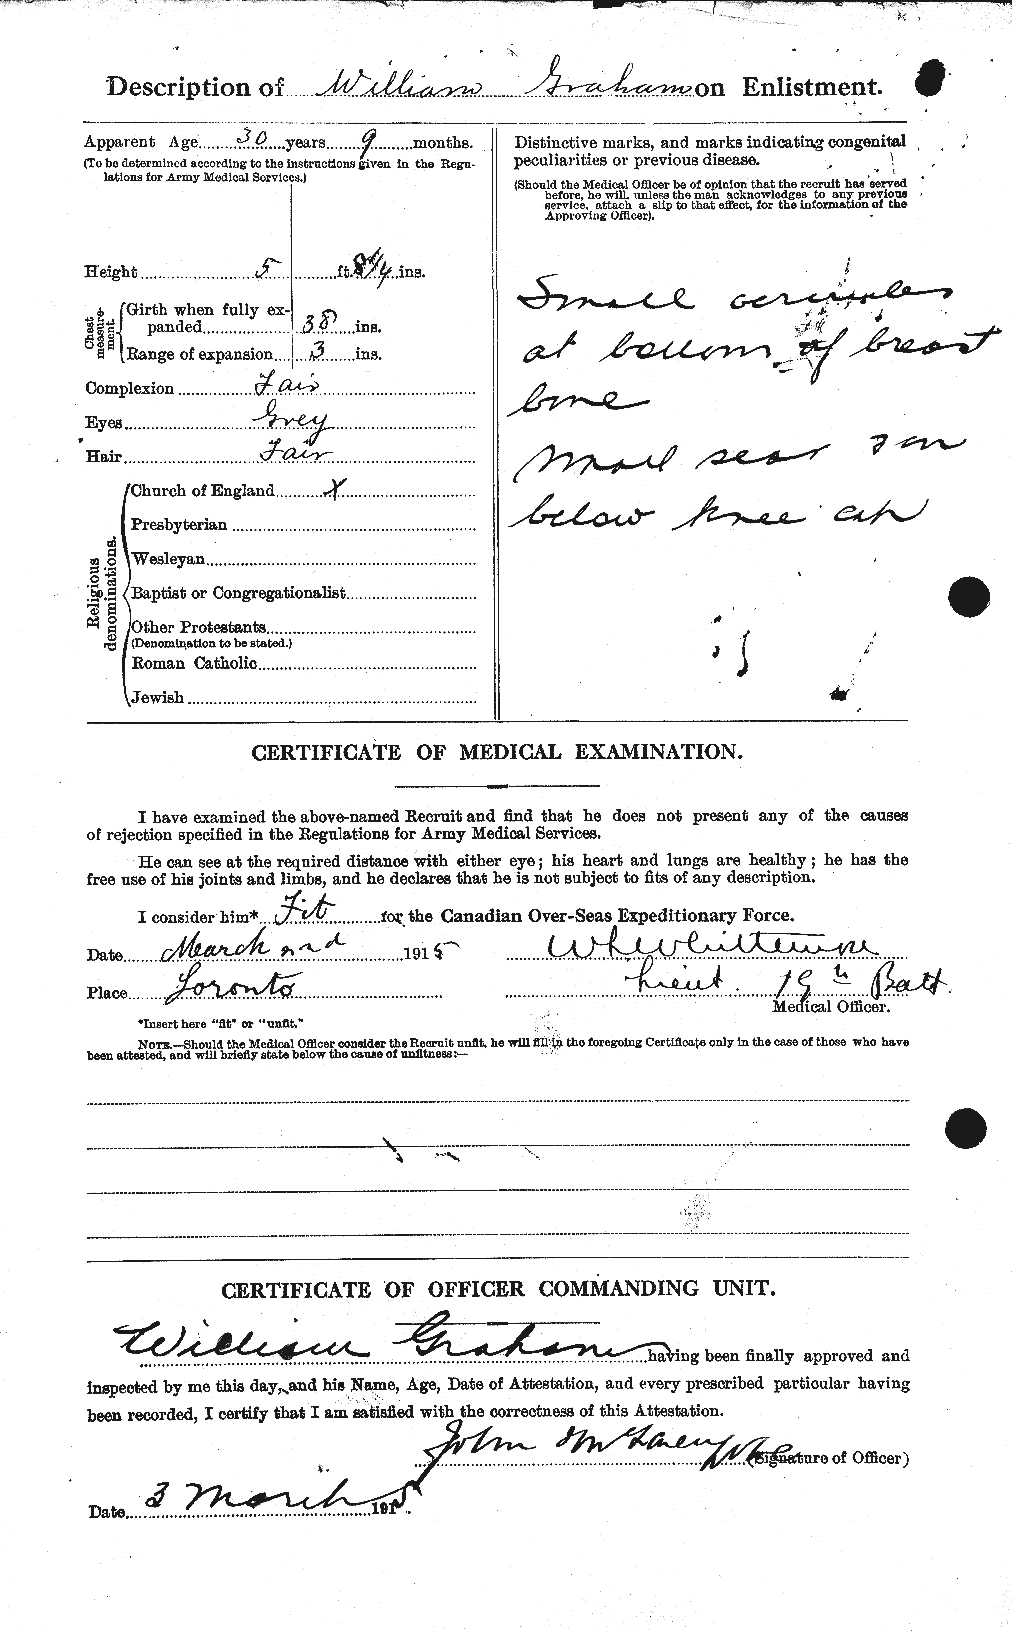 Personnel Records of the First World War - CEF 362681b